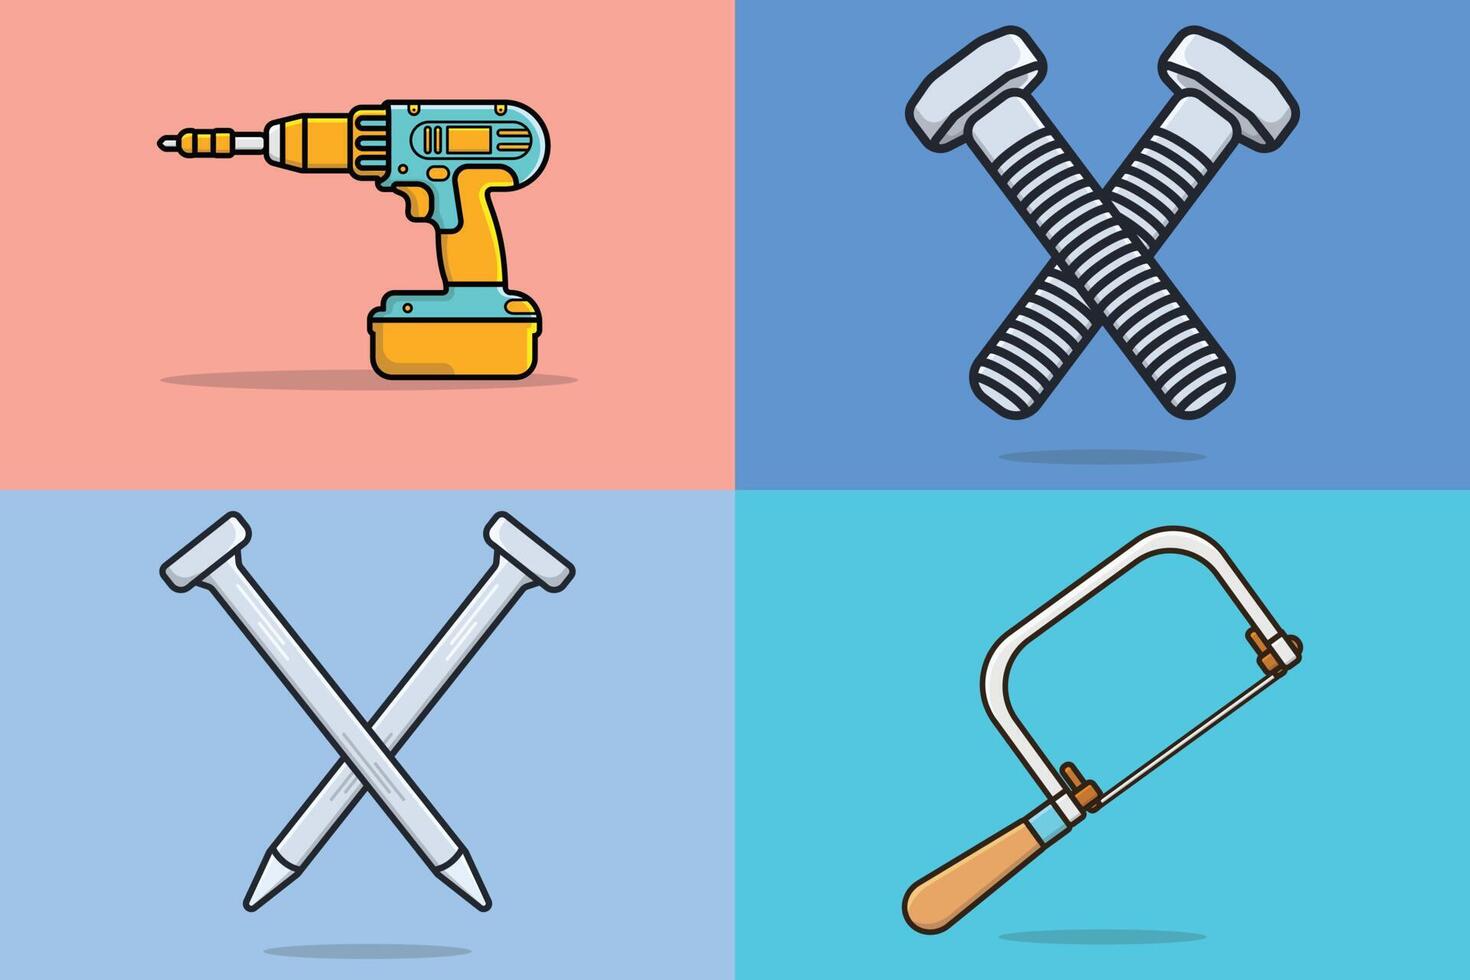 Collection of Construction and Carpenter working tools vector illustration. Drill, Electric Jackhammer, Clamp Compression, Coping Saw working elements logo design. Hand tools for repair, building.